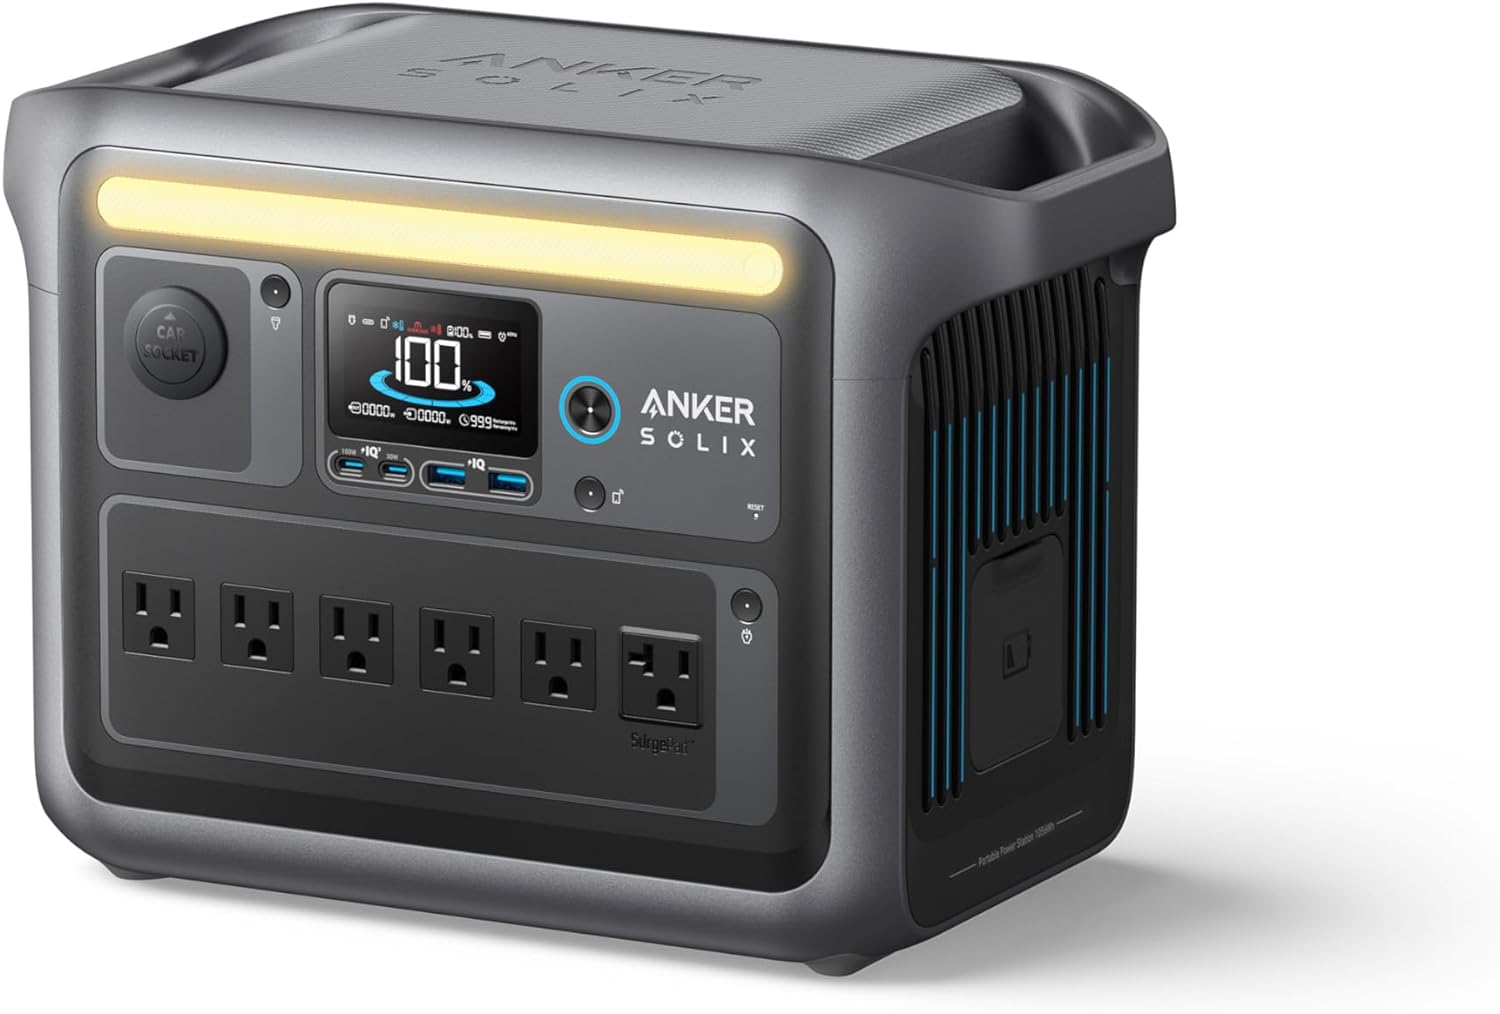 Anker SOLIX C1000: Now $370 OFF on Amazon!